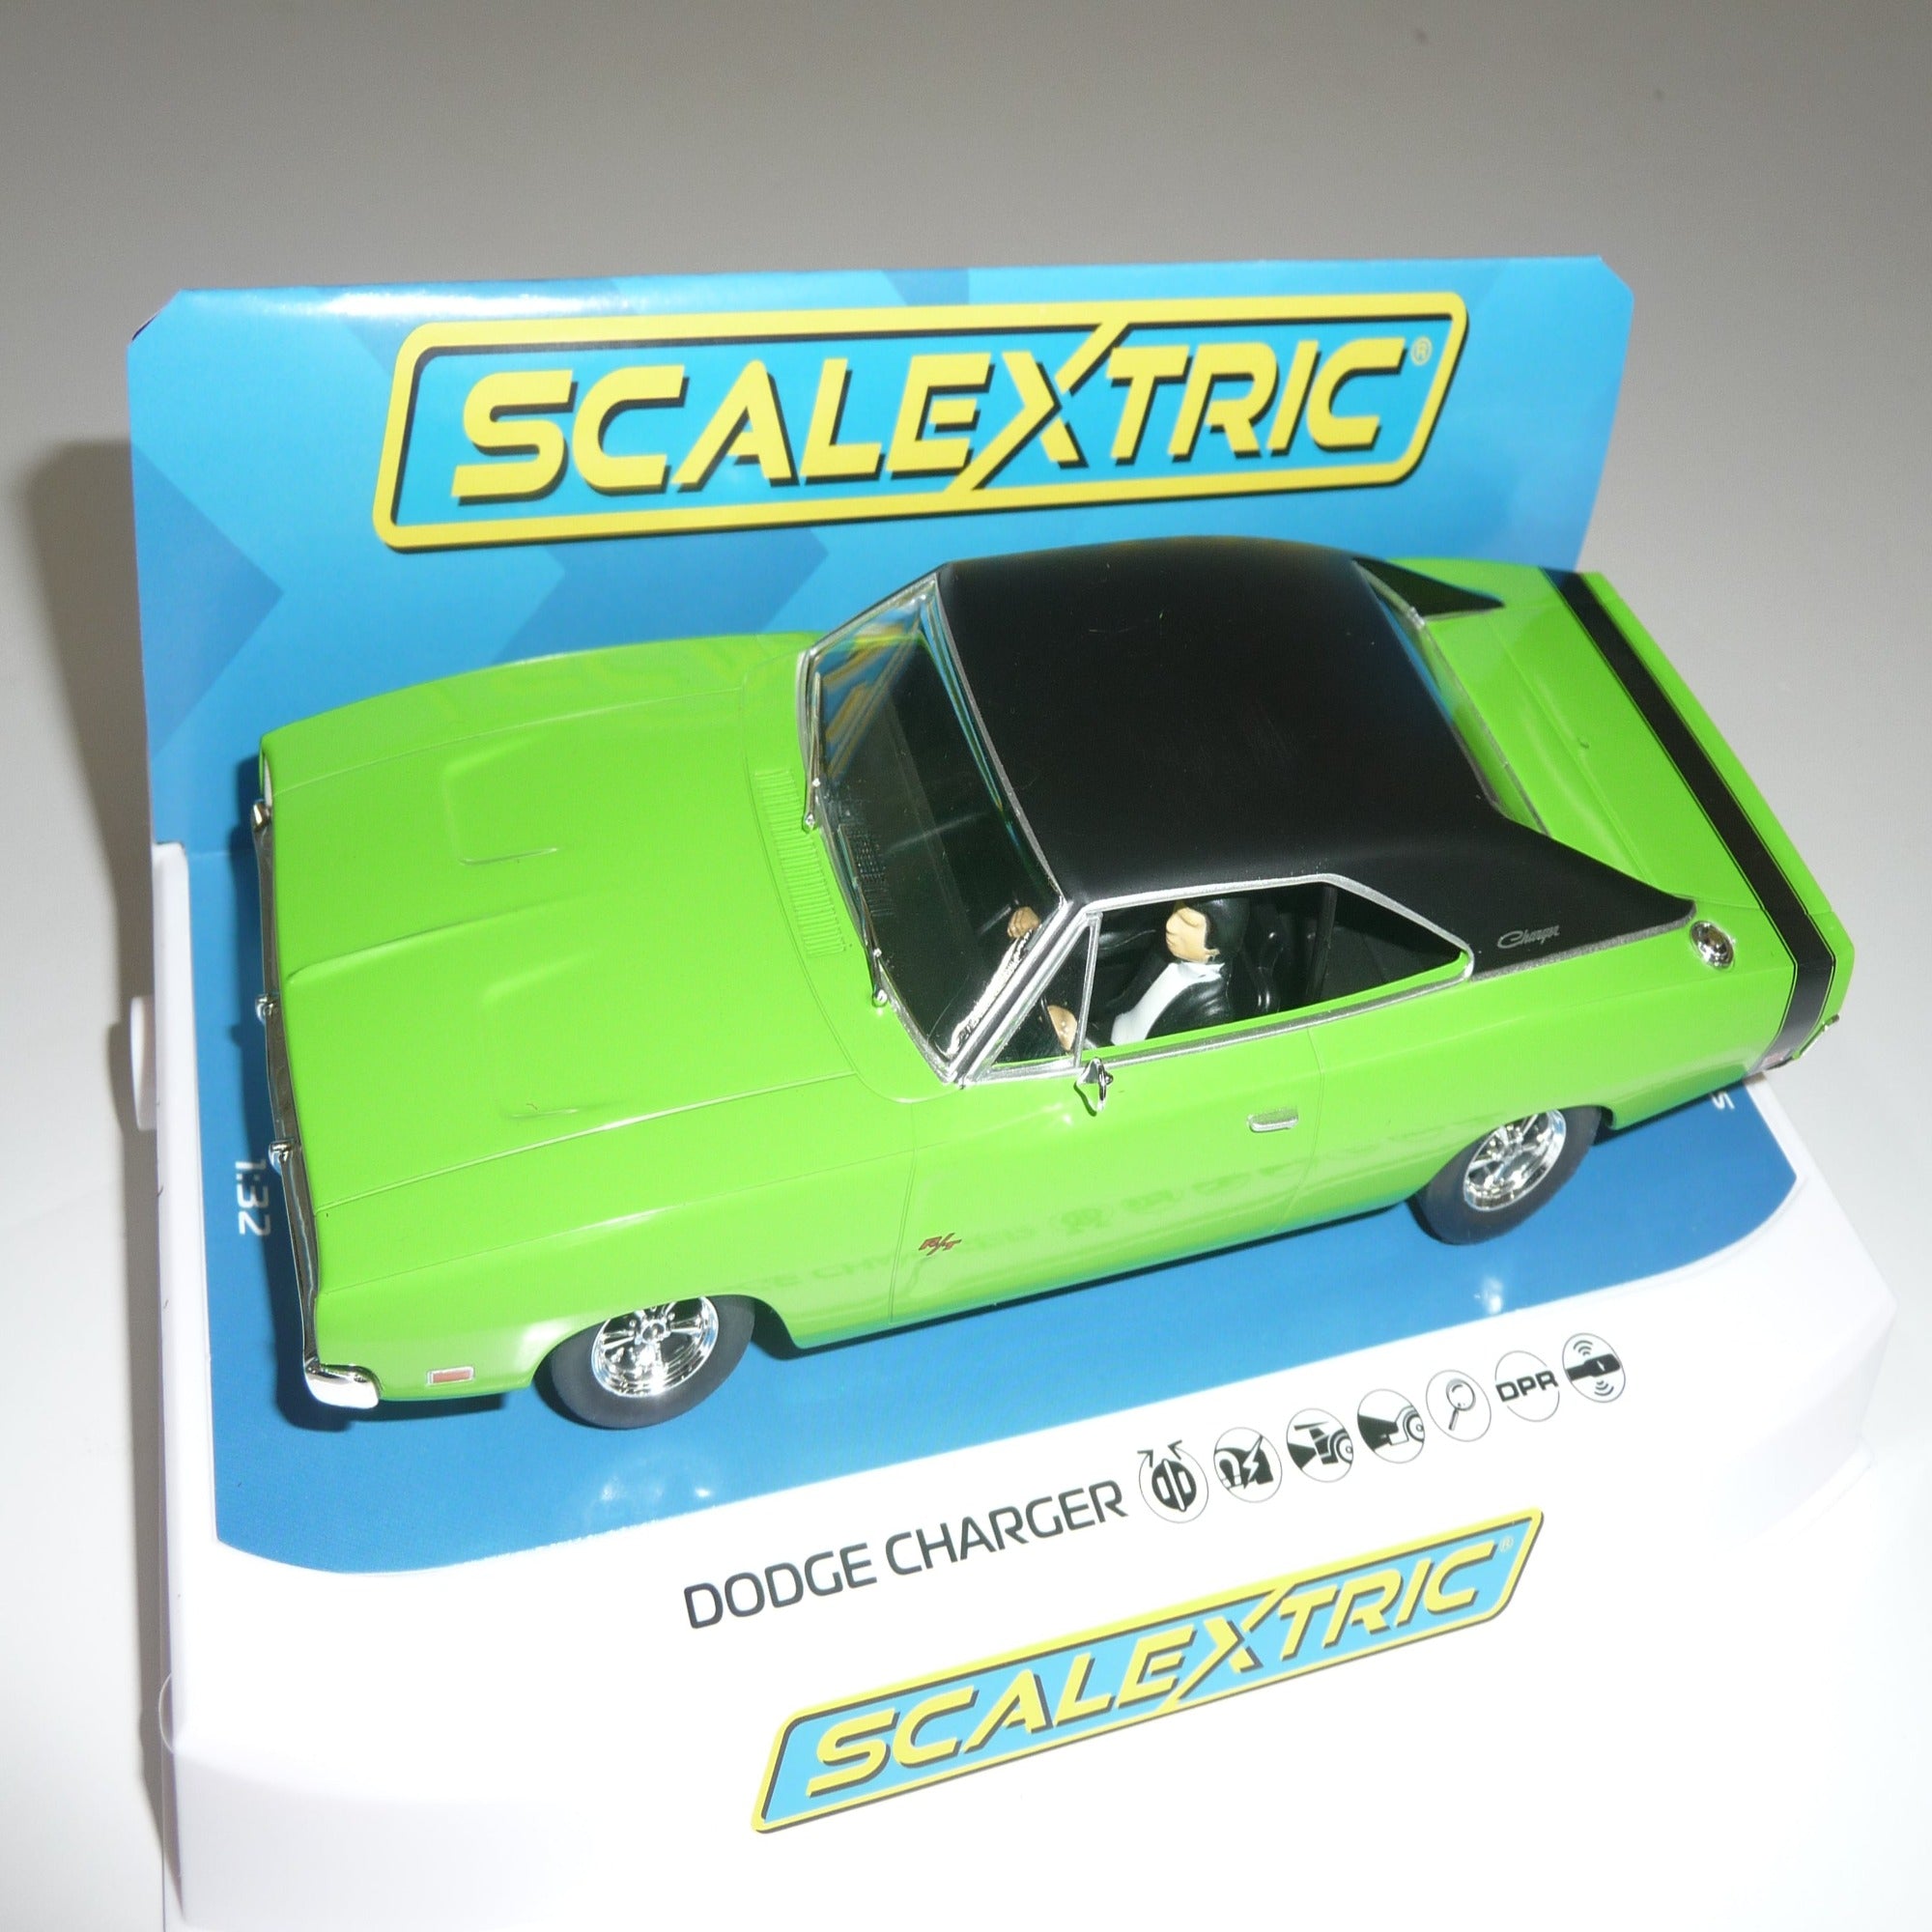 Scalextric  Dodge Charger RT C4326 Free Postage on Orders over $40